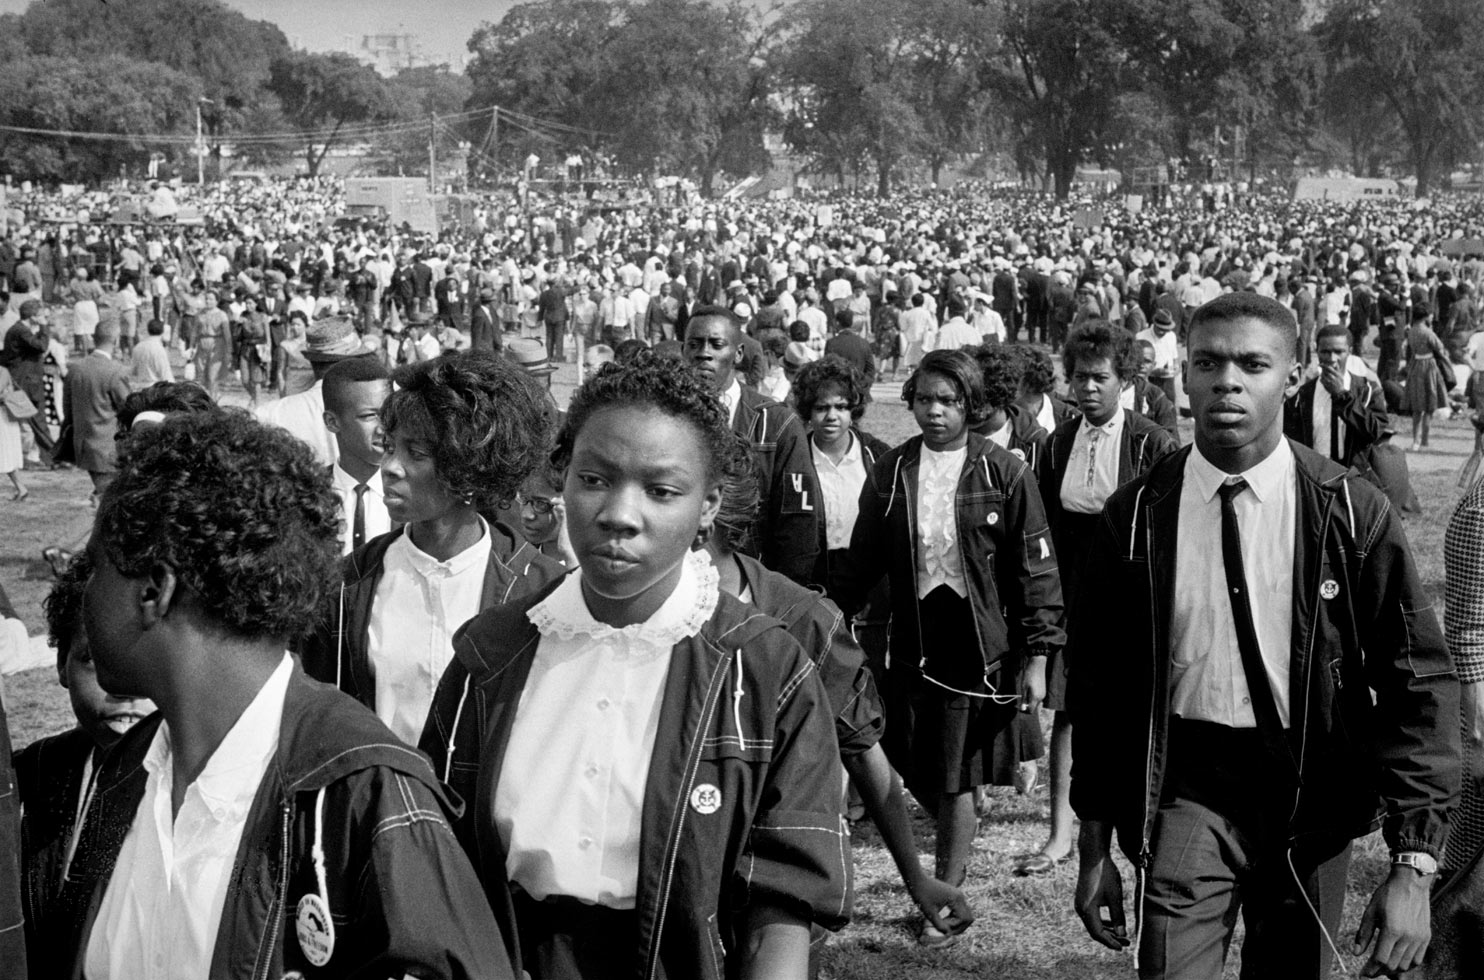 "'The March on Washington for Jobs and Freedom' called for the desegregation of public schools, protection of the right to vote, and a federal program to train unemployed workers."